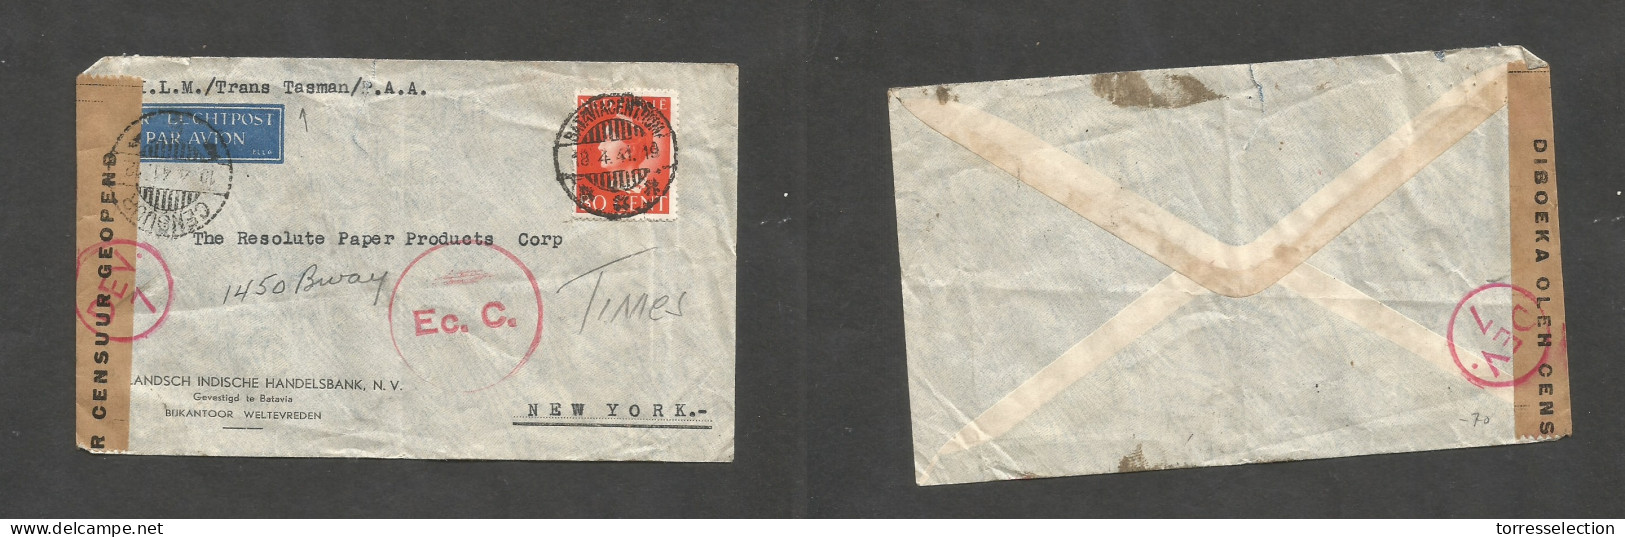 DUTCH INDIES. 1941 (18 April) Batavia - USA, NYC. Single 80c Red Fkd Comercial Envelope, WWII Censored Air Route KNILM / - Nederlands-Indië